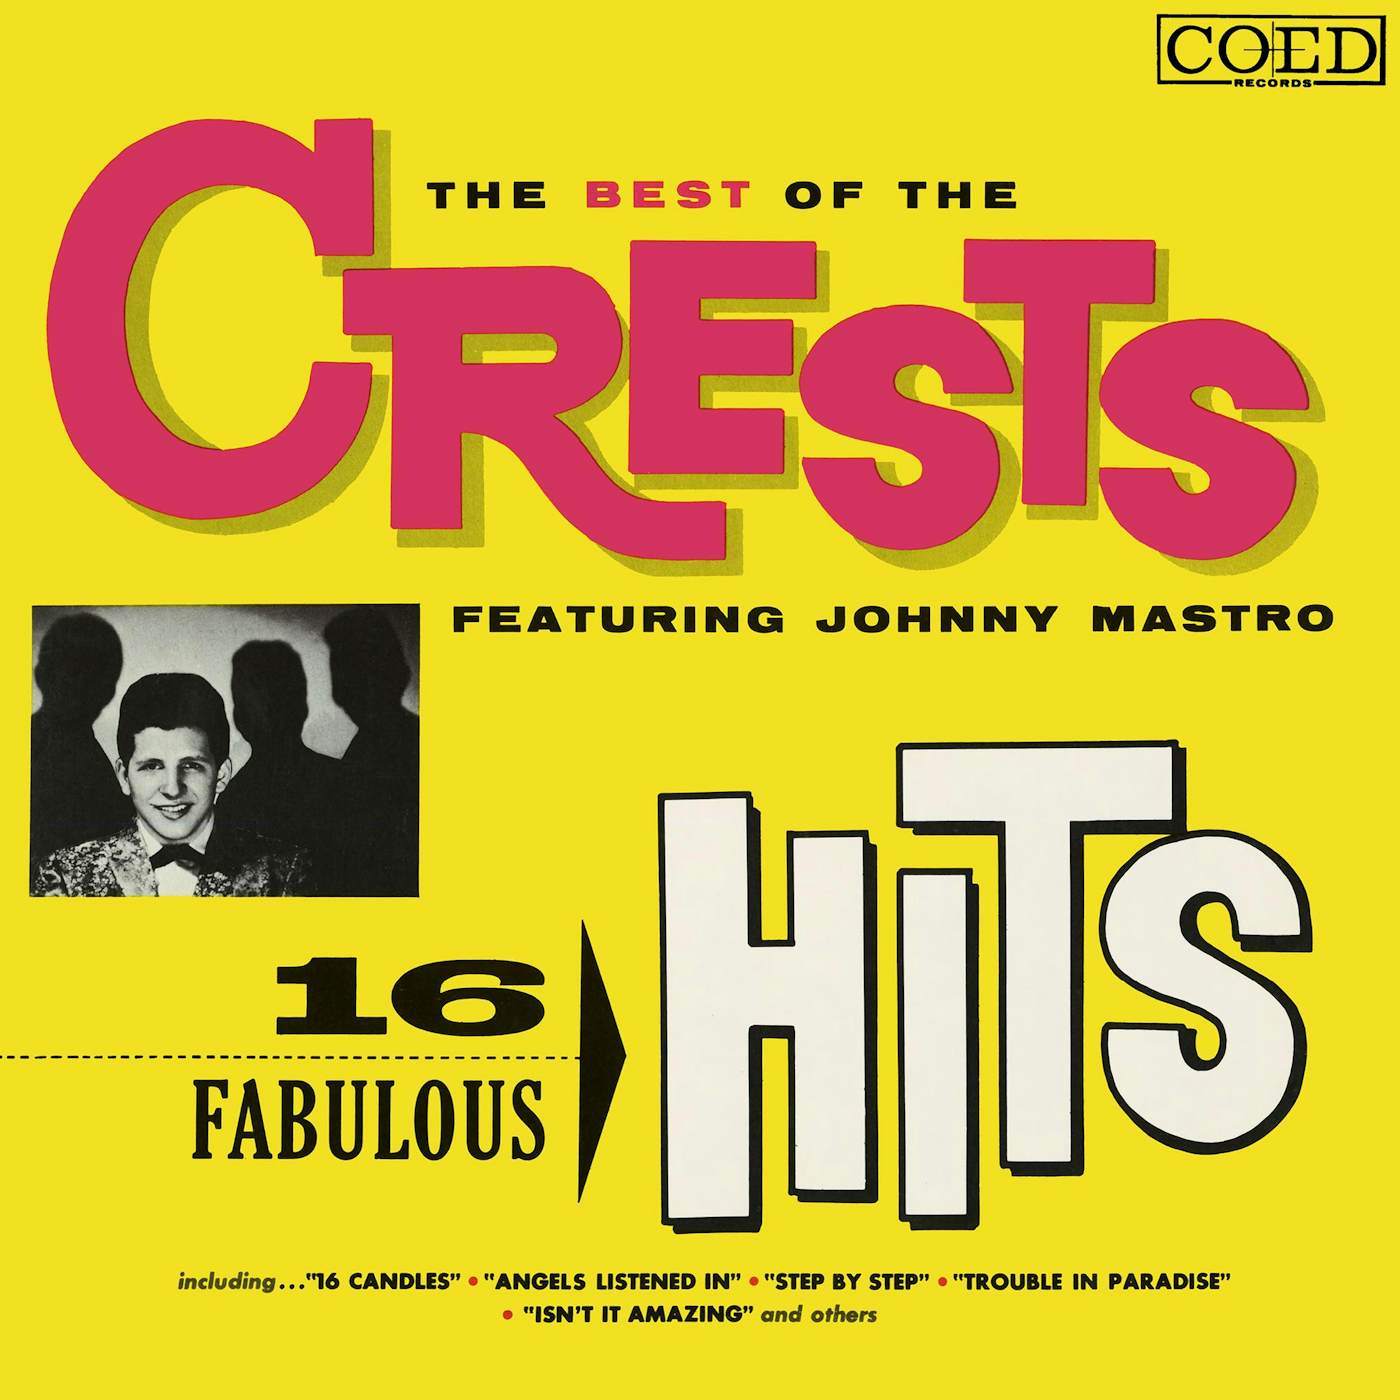 BEST OF THE CRESTS CD